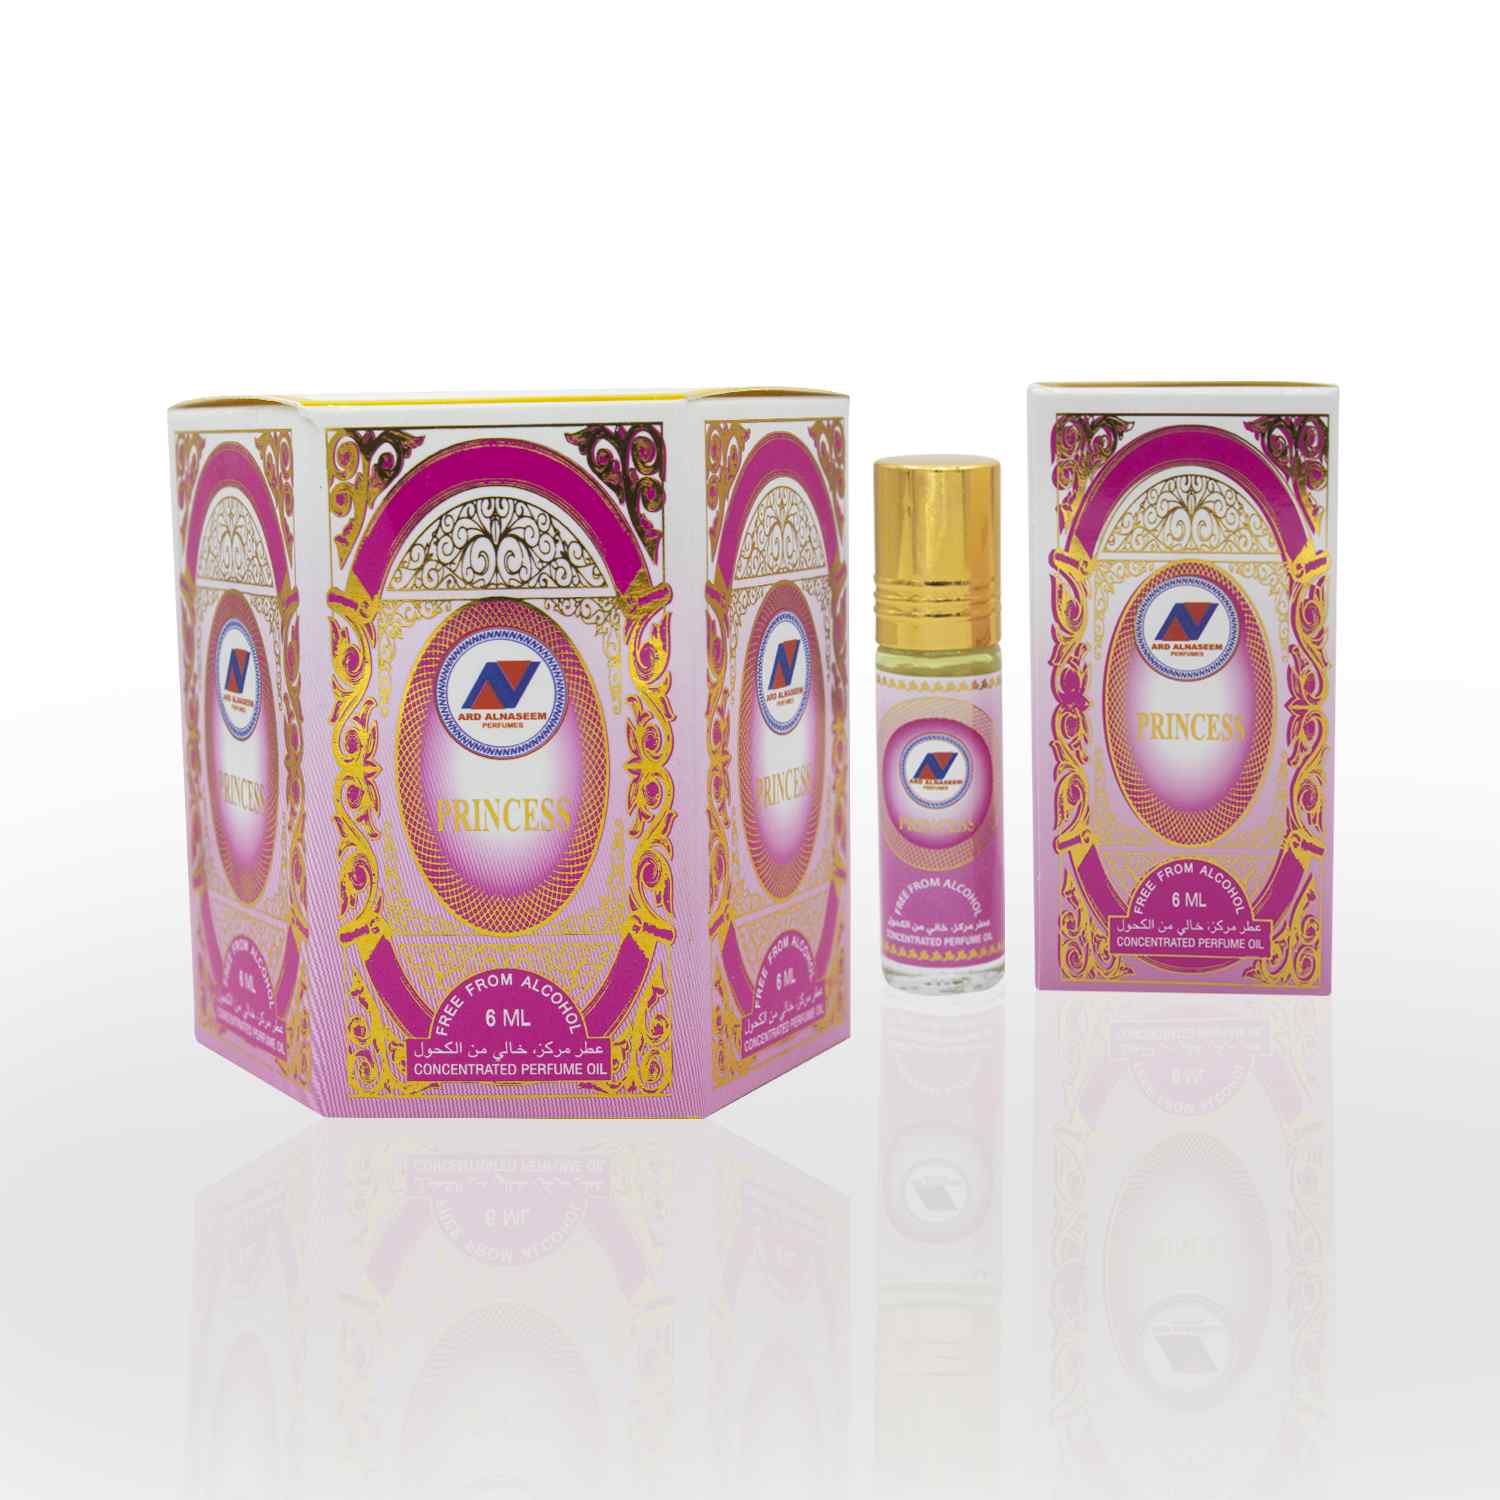 Princess 6ml Attar is a concentered perfume oil, free from Alcohol. It is a product of ARD perfumes. Made in UAE